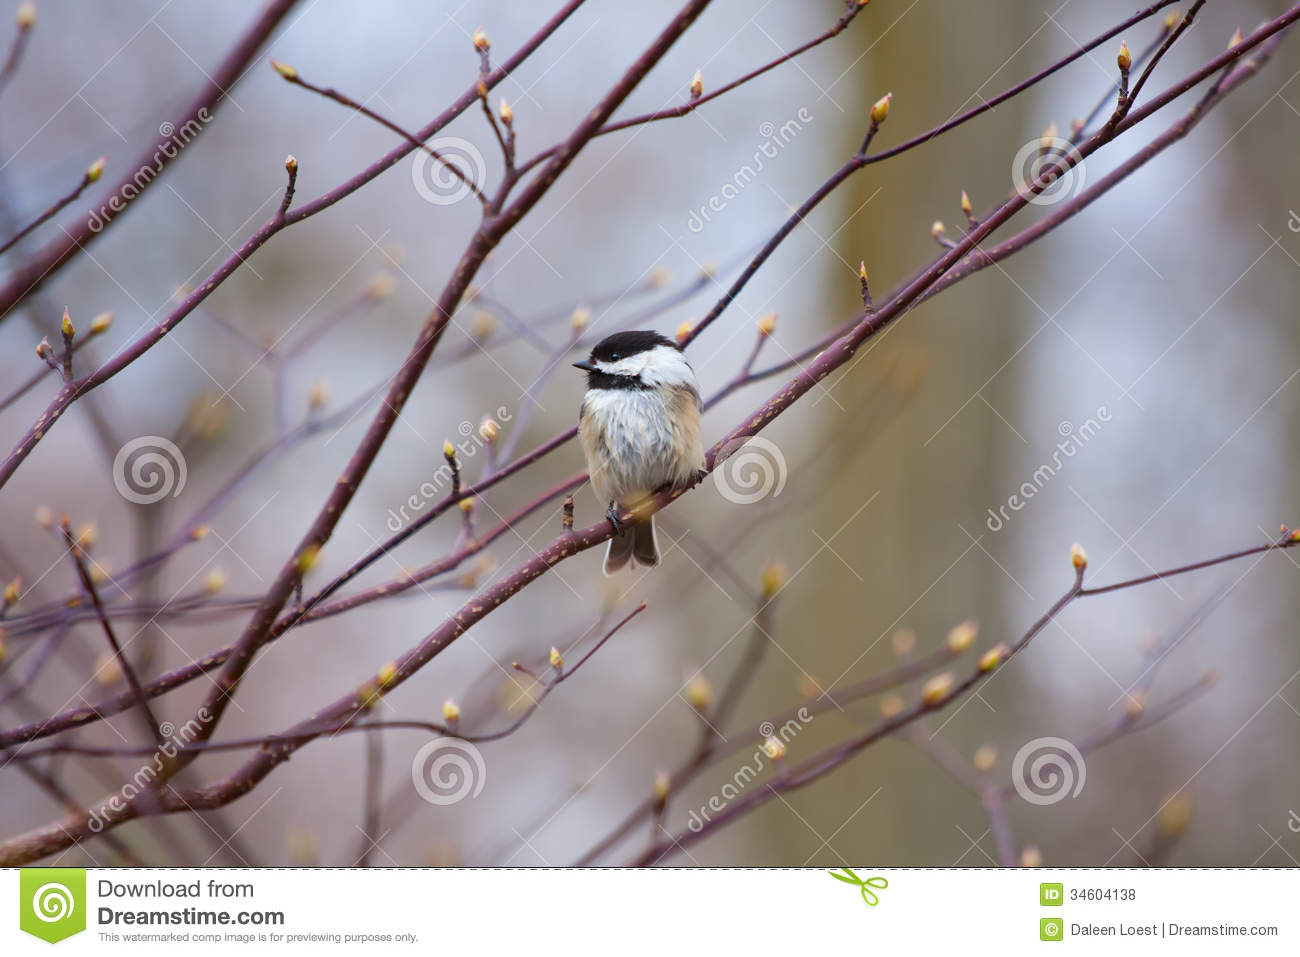 Single Black Capped Chickadee Bird On A Budding Tree Branch At The